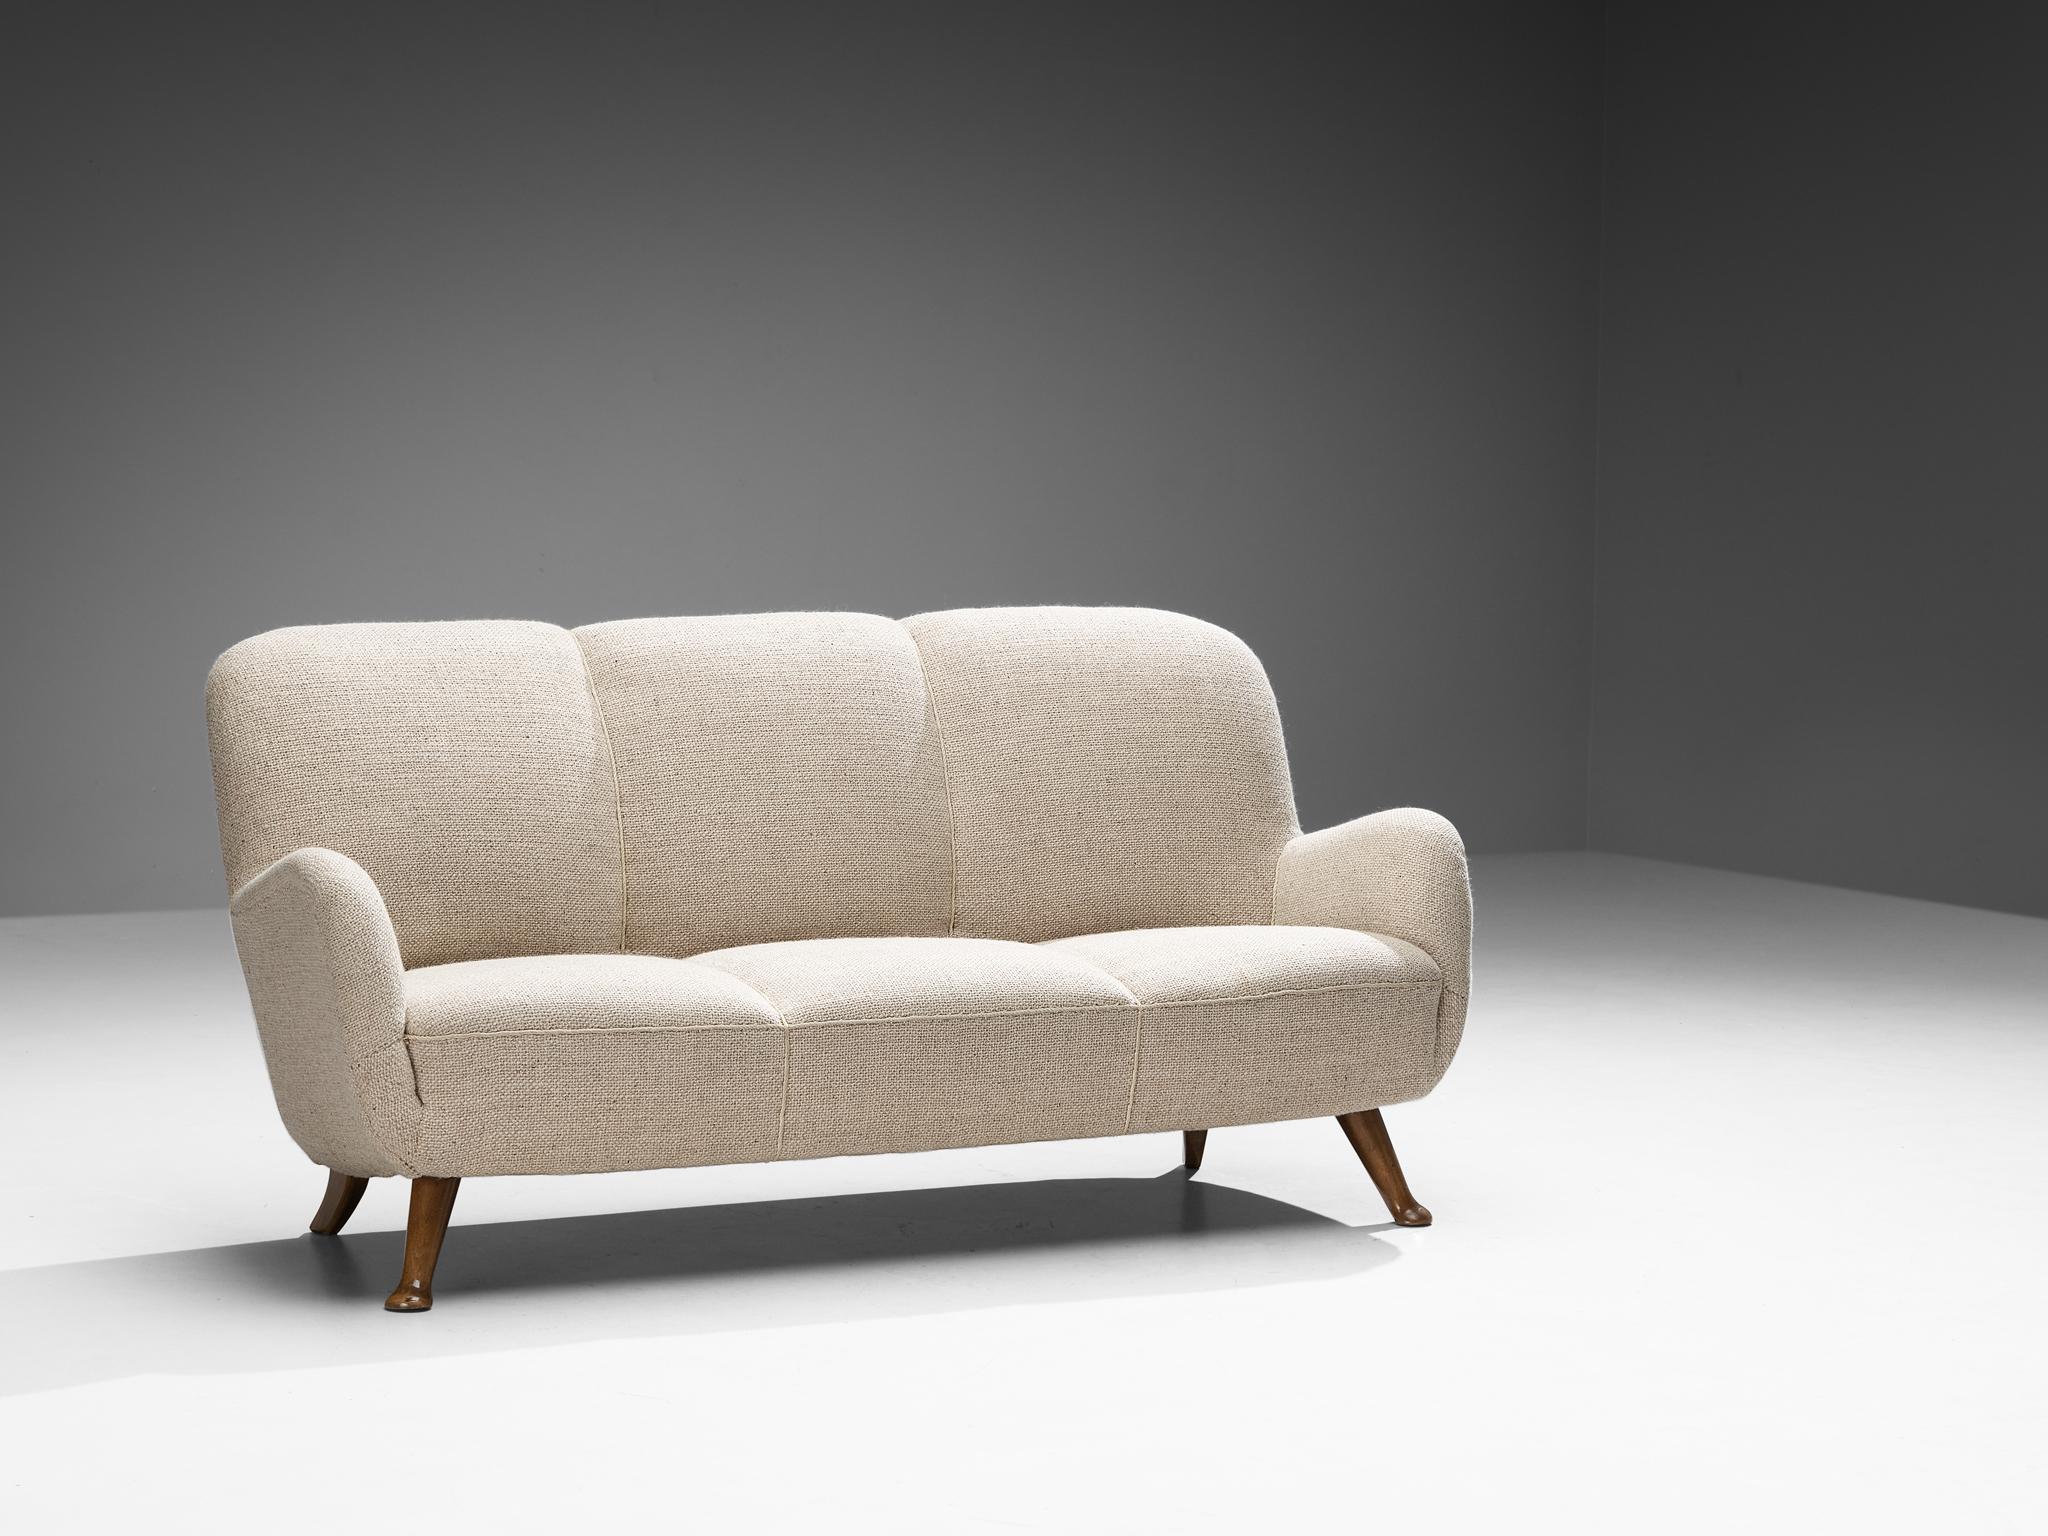 Berga Mobler, sofa, beech, velvet, Denmark, 1940s.

This bold and curvy sofa is based on a solid construction with a tender touch due to the soft texture of the teddy fabric. The whole shell is slightly tilted backwards. The corpus rests on four